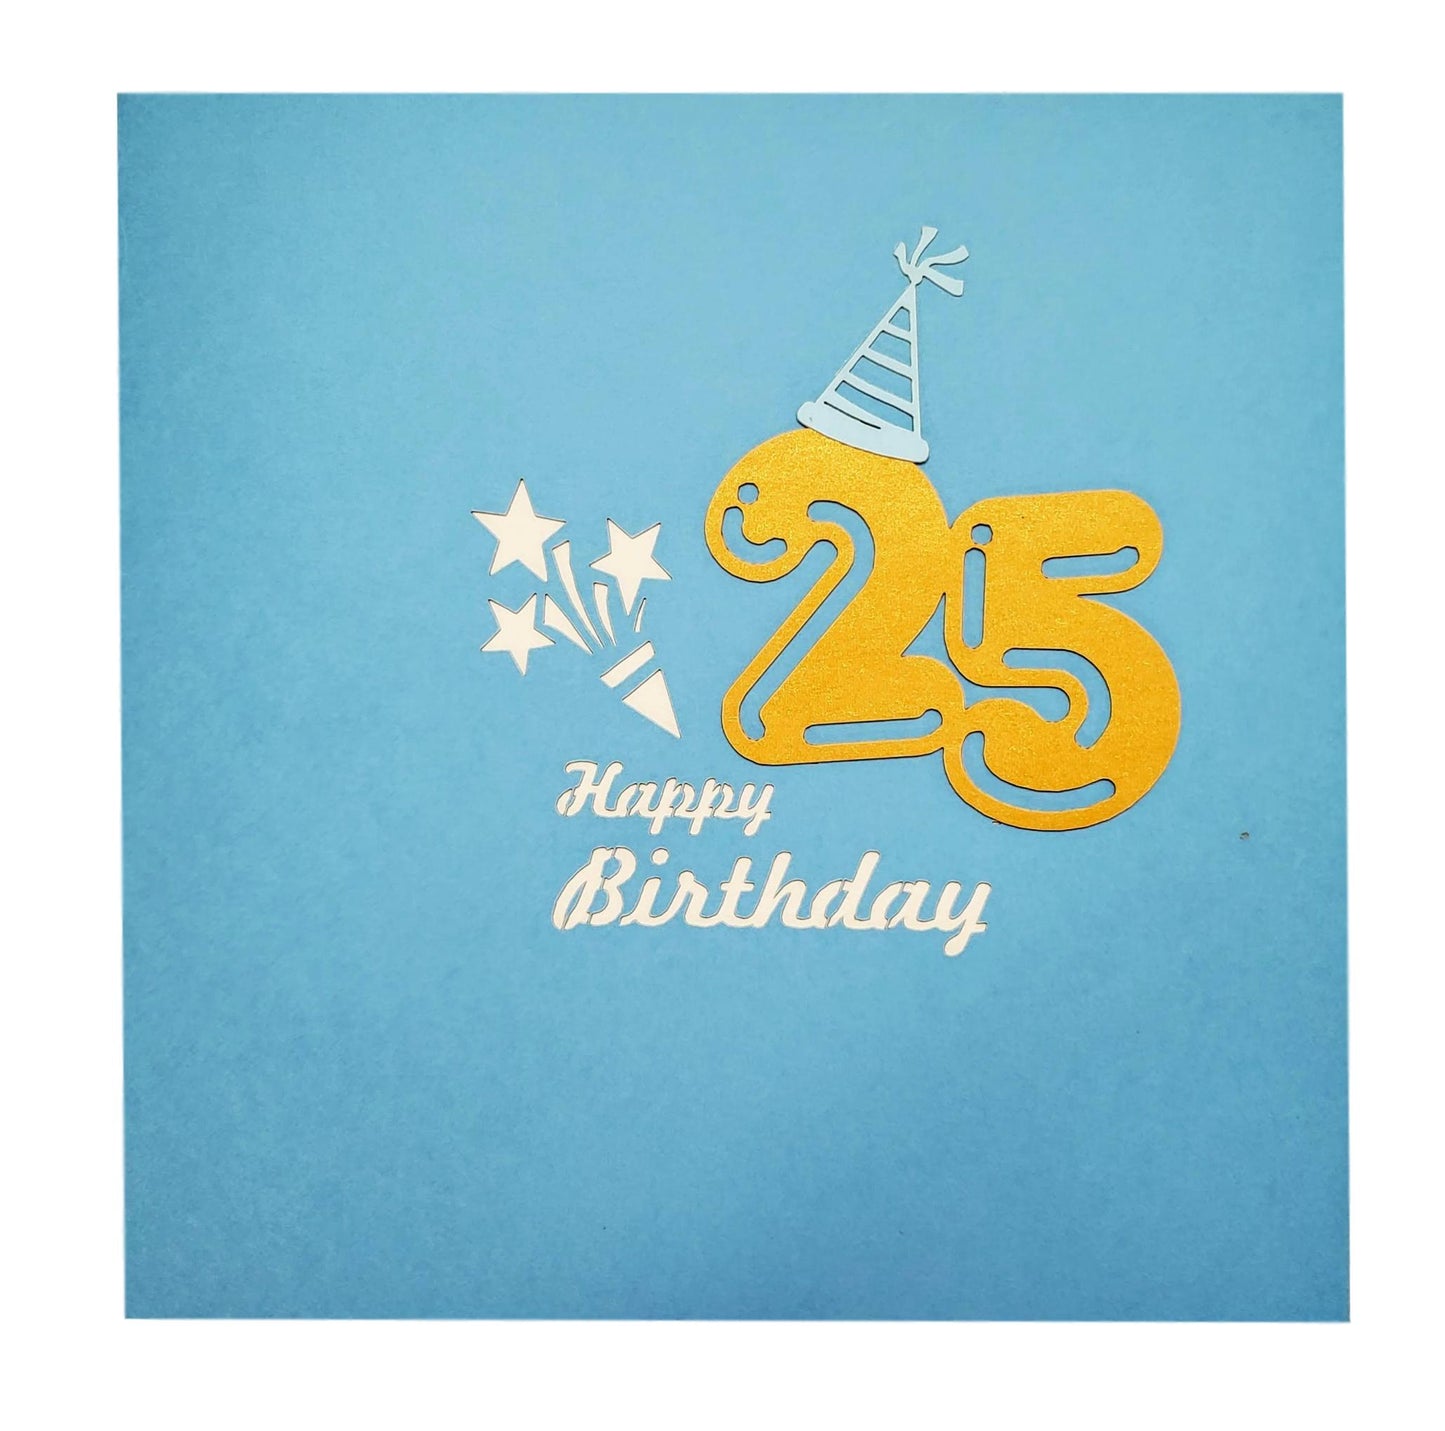 25th Blue Party Box 3D Pop Up Greeting Card - Balloons - best wishes - Birthday - Blue - Celebration - iGifts And Cards